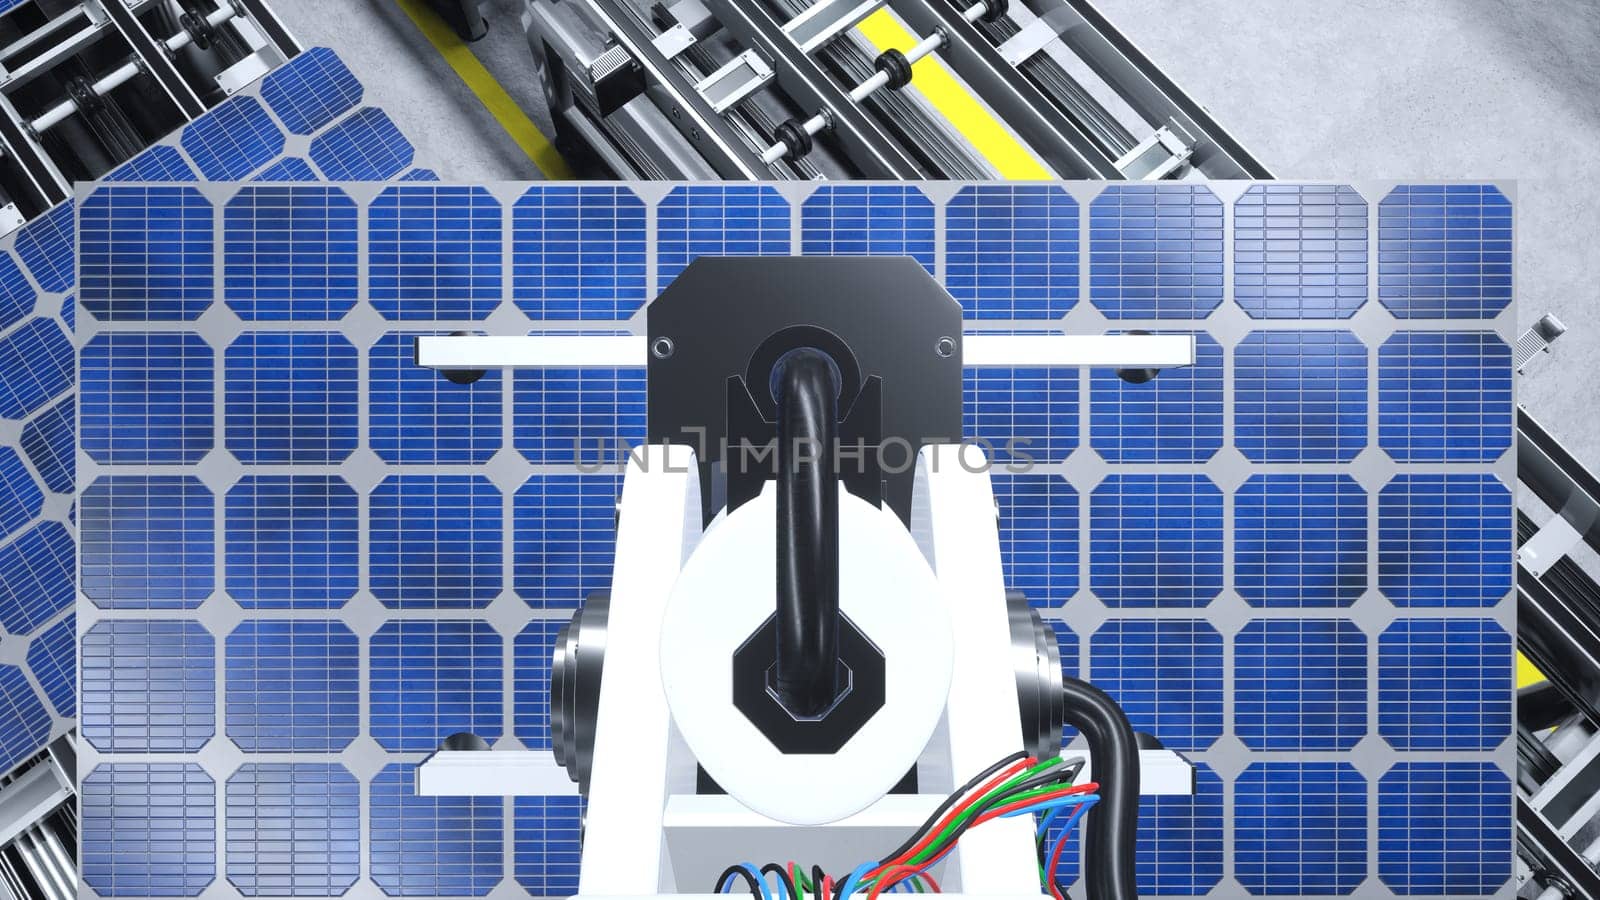 POV of robotic arms moving solar panels on conveyor belts during high tech production process in green technology factory, 3D illustration. Heavy gear unit placing PV cells on assembly lines